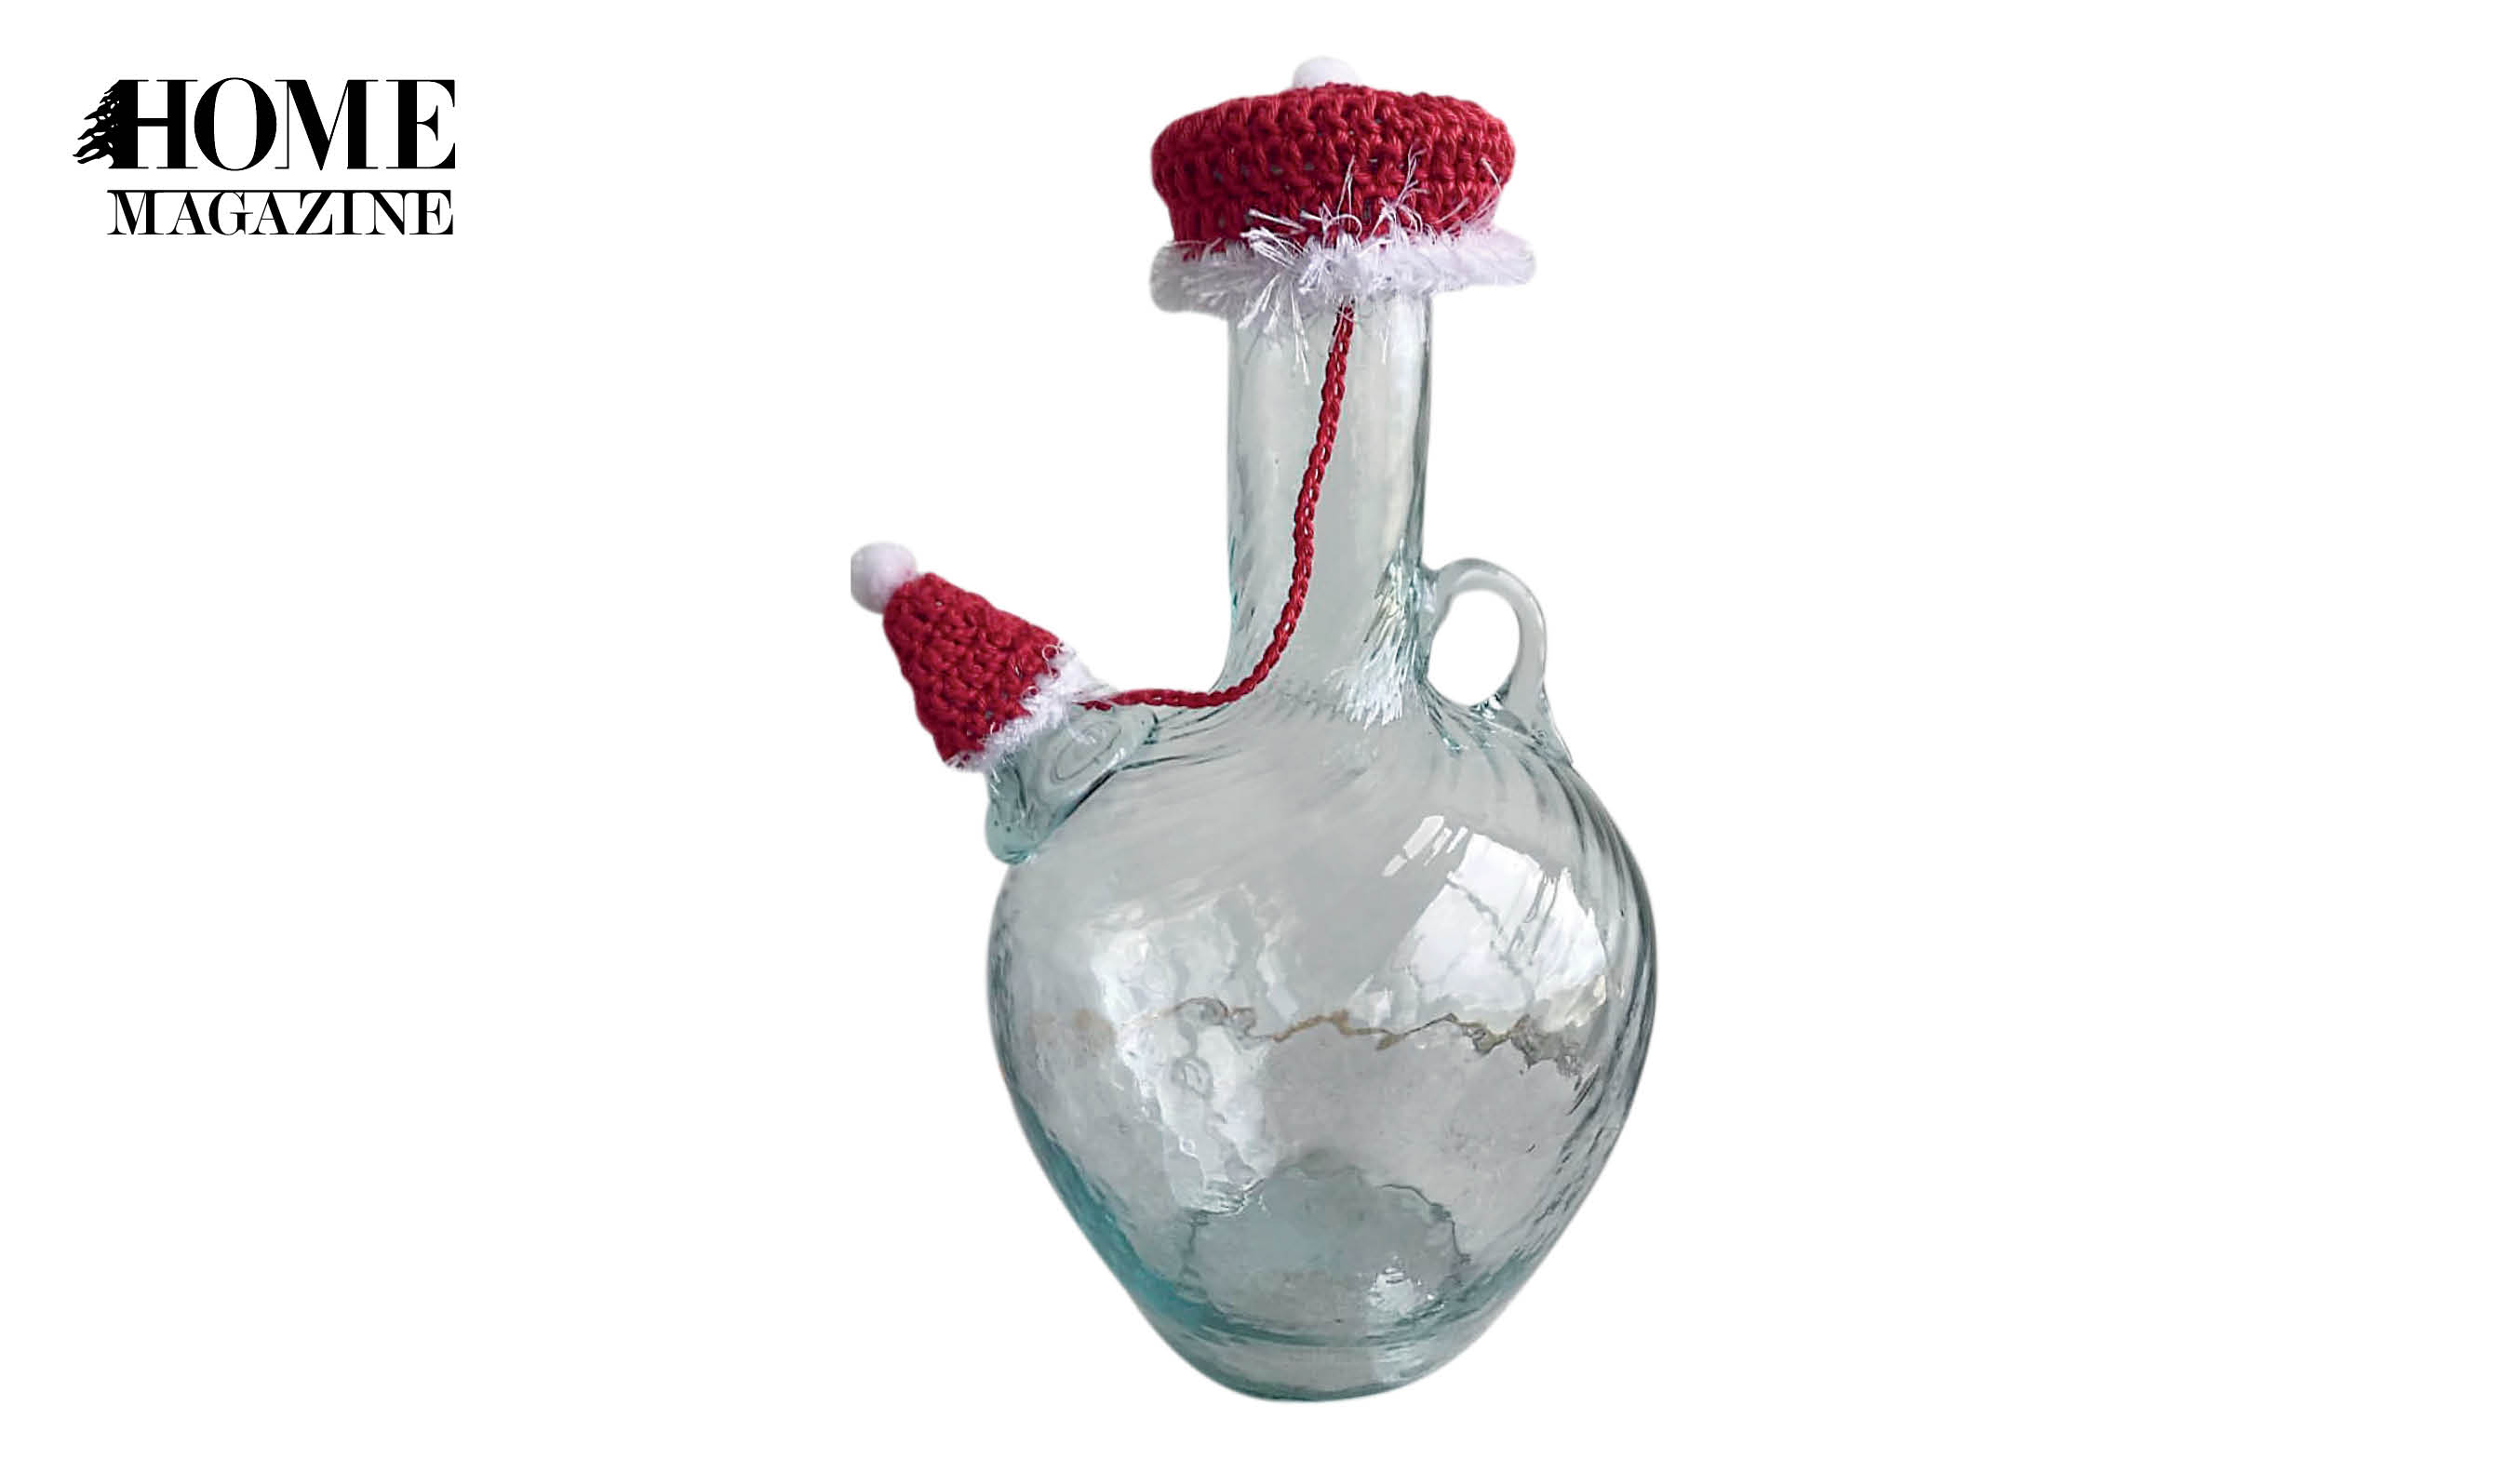 Glass pitcher with red crochet